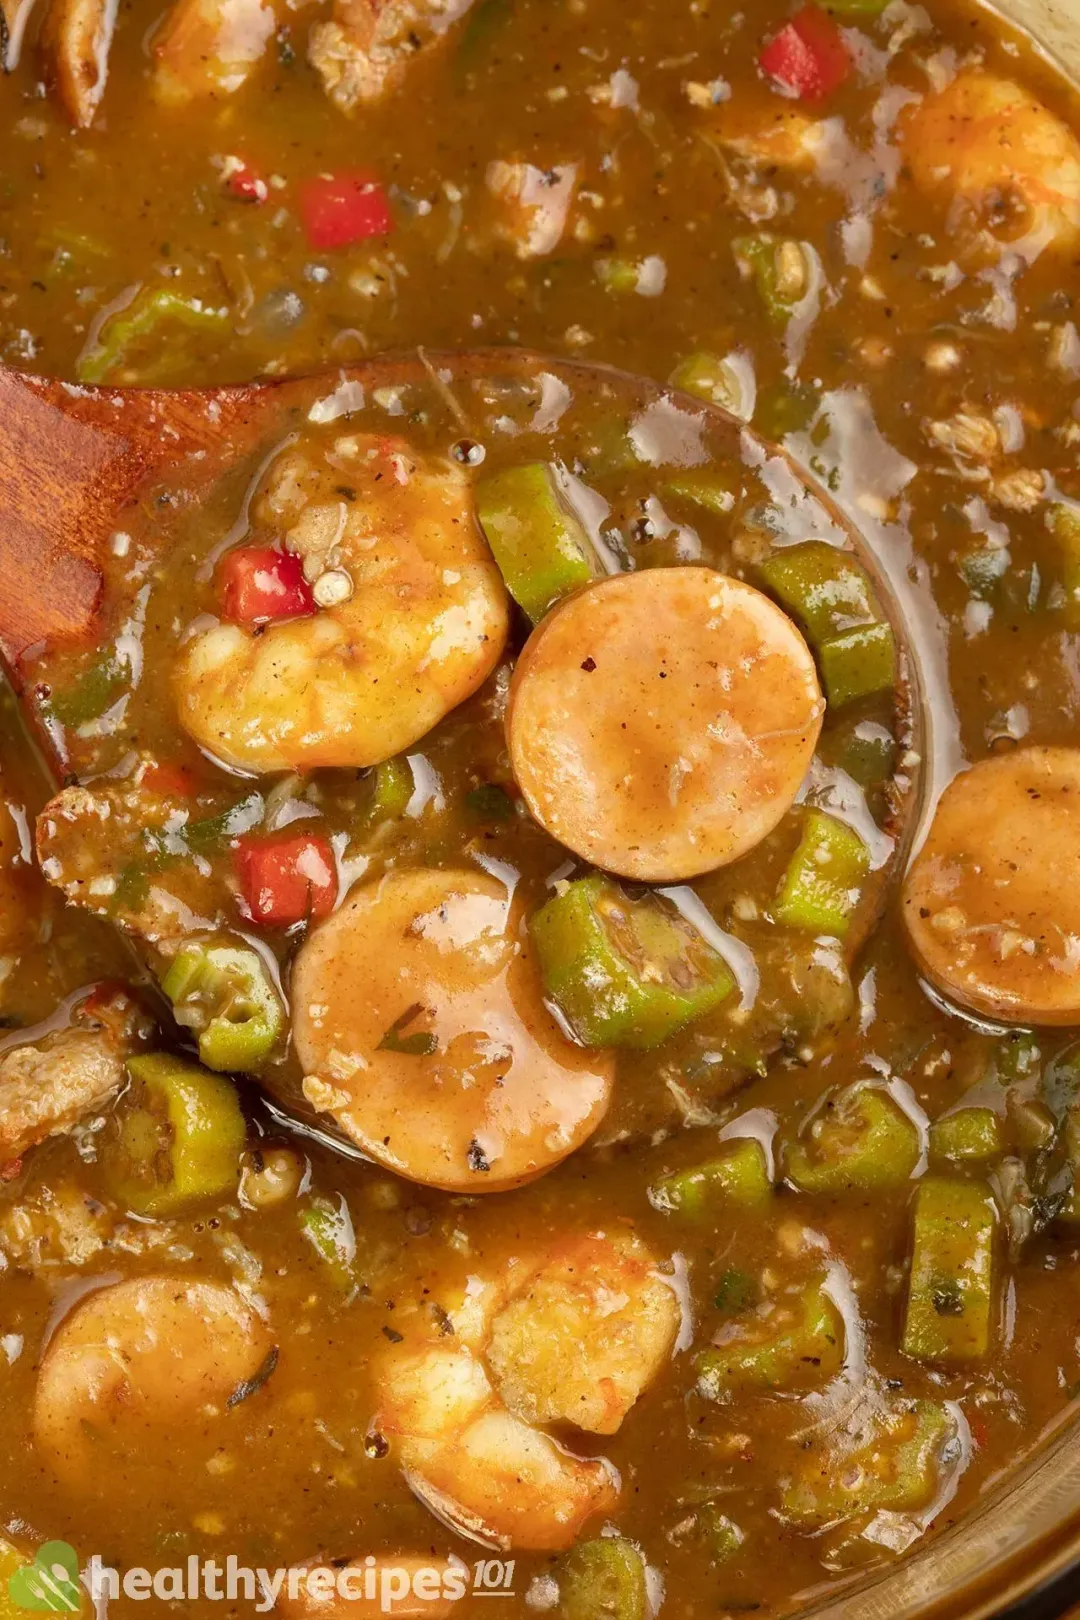 why is it called gumbo